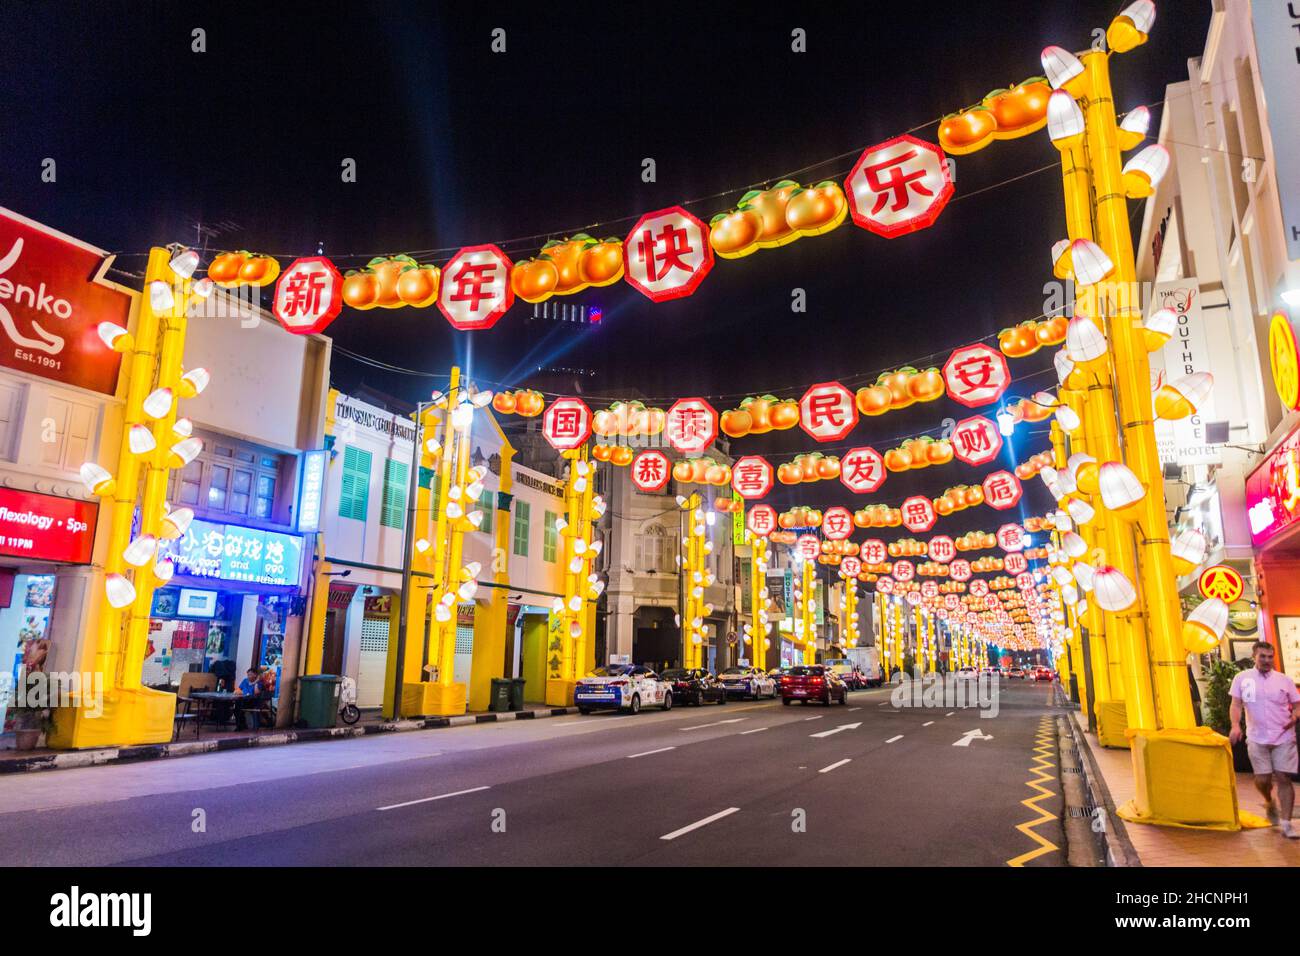 SINGAPORE, SINGAPORE - MARCH 10, 2018: Night view of South Bridge Road in the Chinatown of Singapore Stock Photo